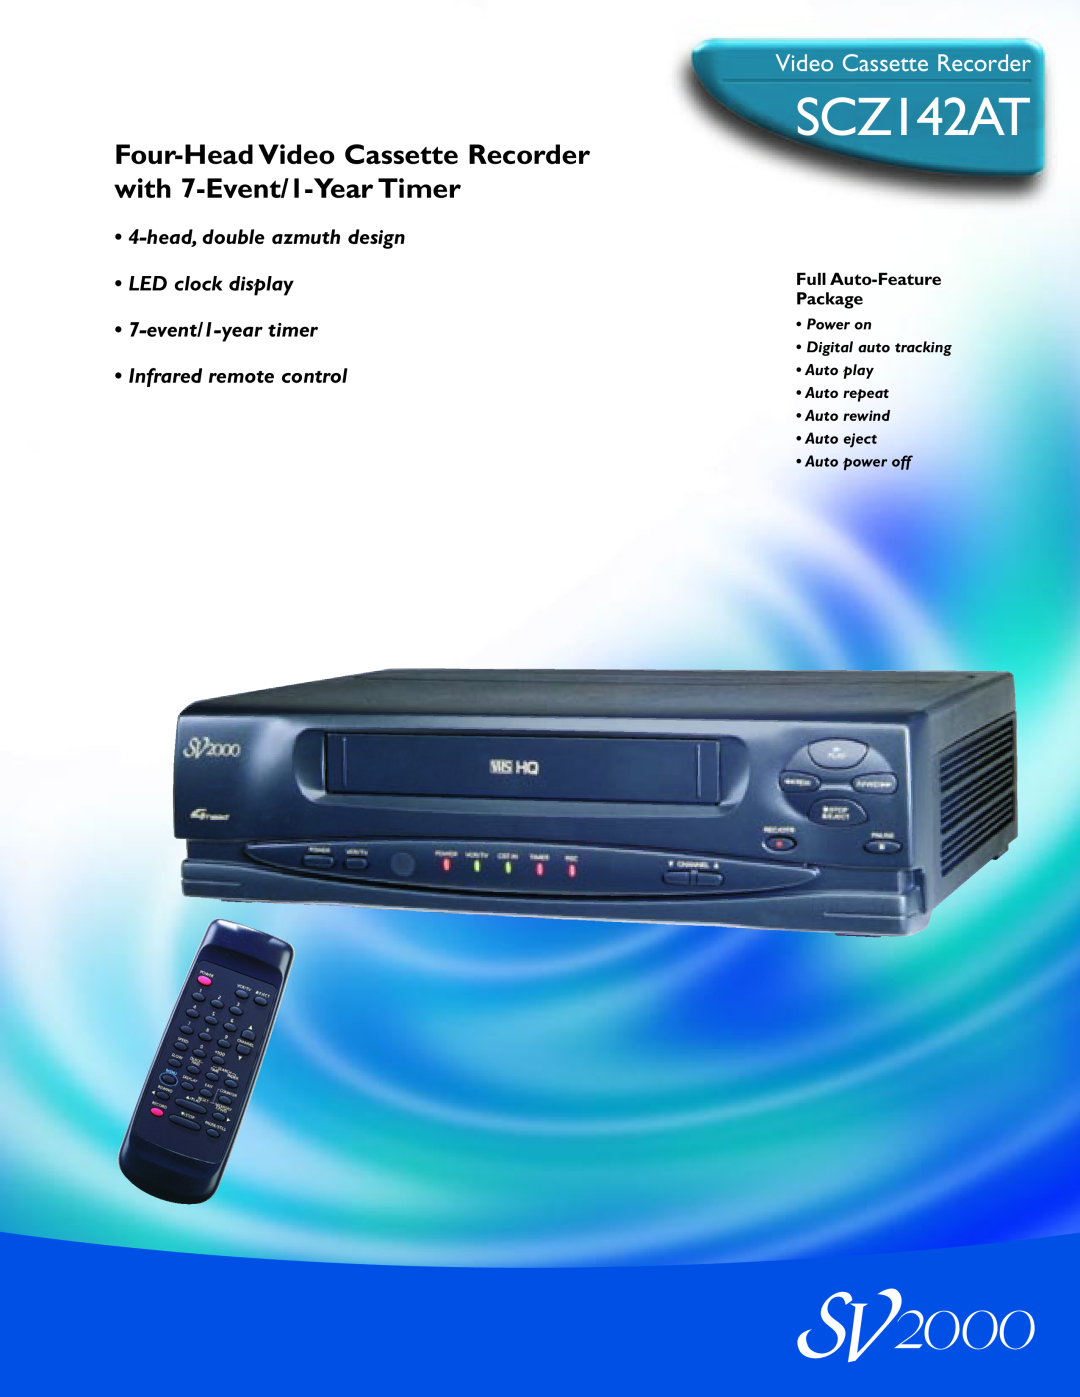 Philips SCZ142AT manual Video Cassette Recorder, Full Auto-Feature Package, Infrared remote control 